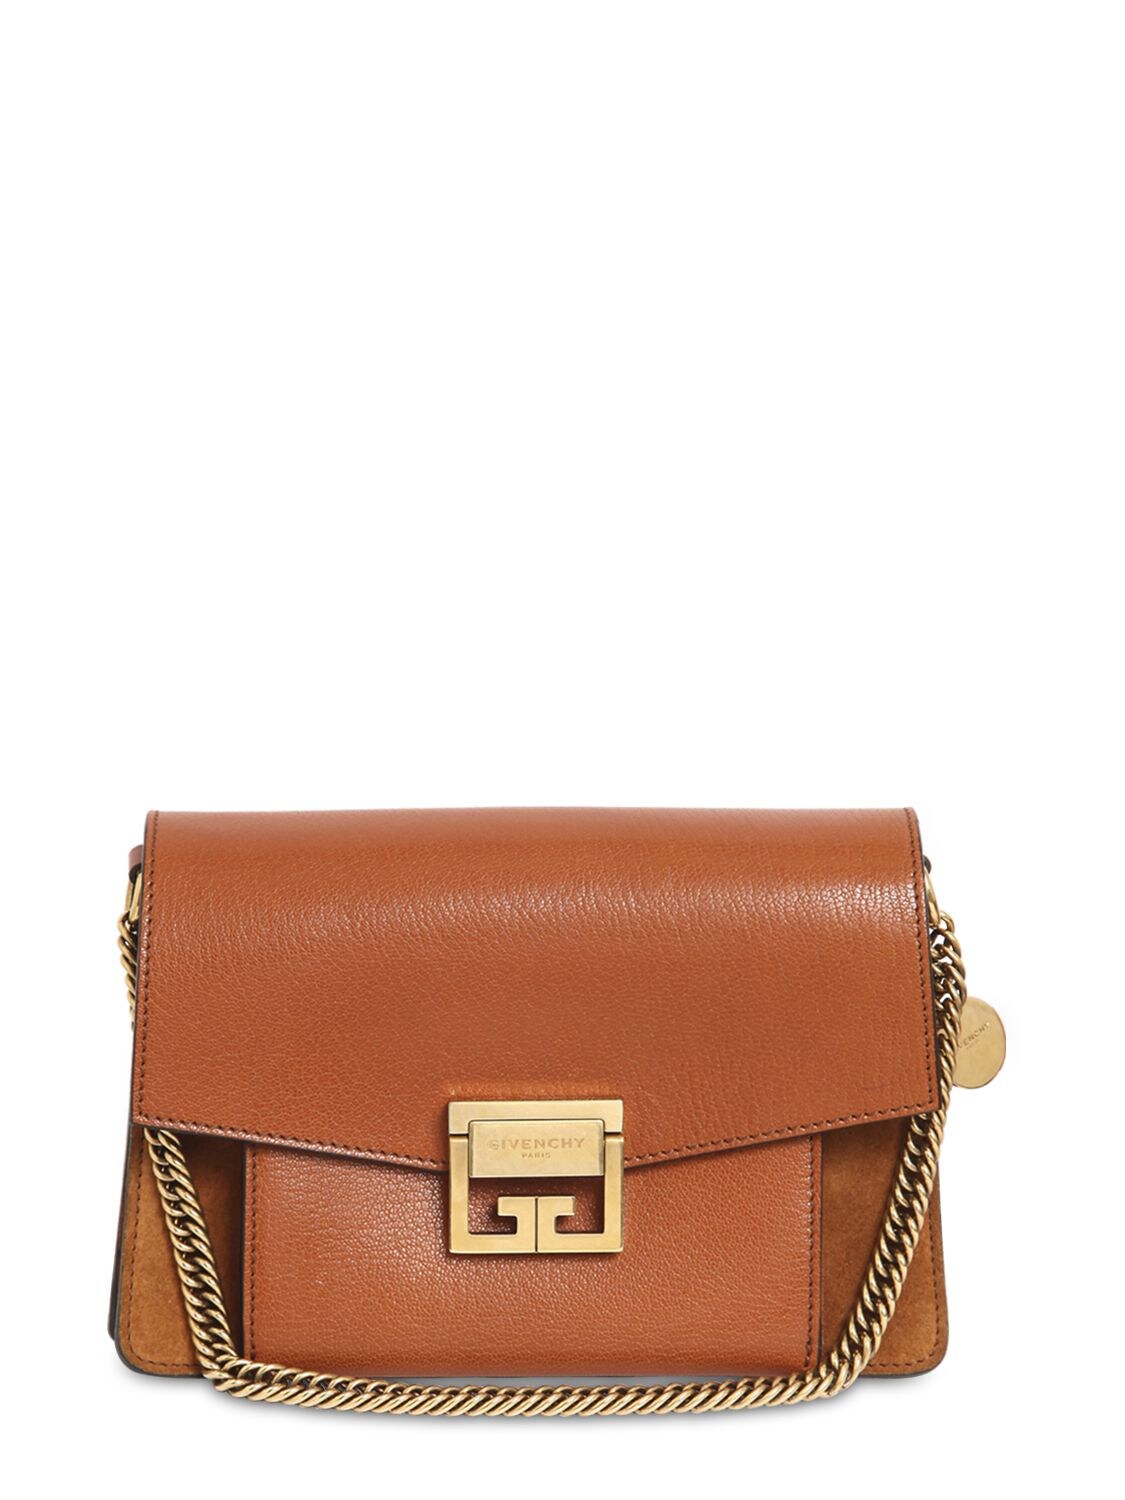 Givenchy Small Gv3 Leather & Suede Shoulder Bag In Tan